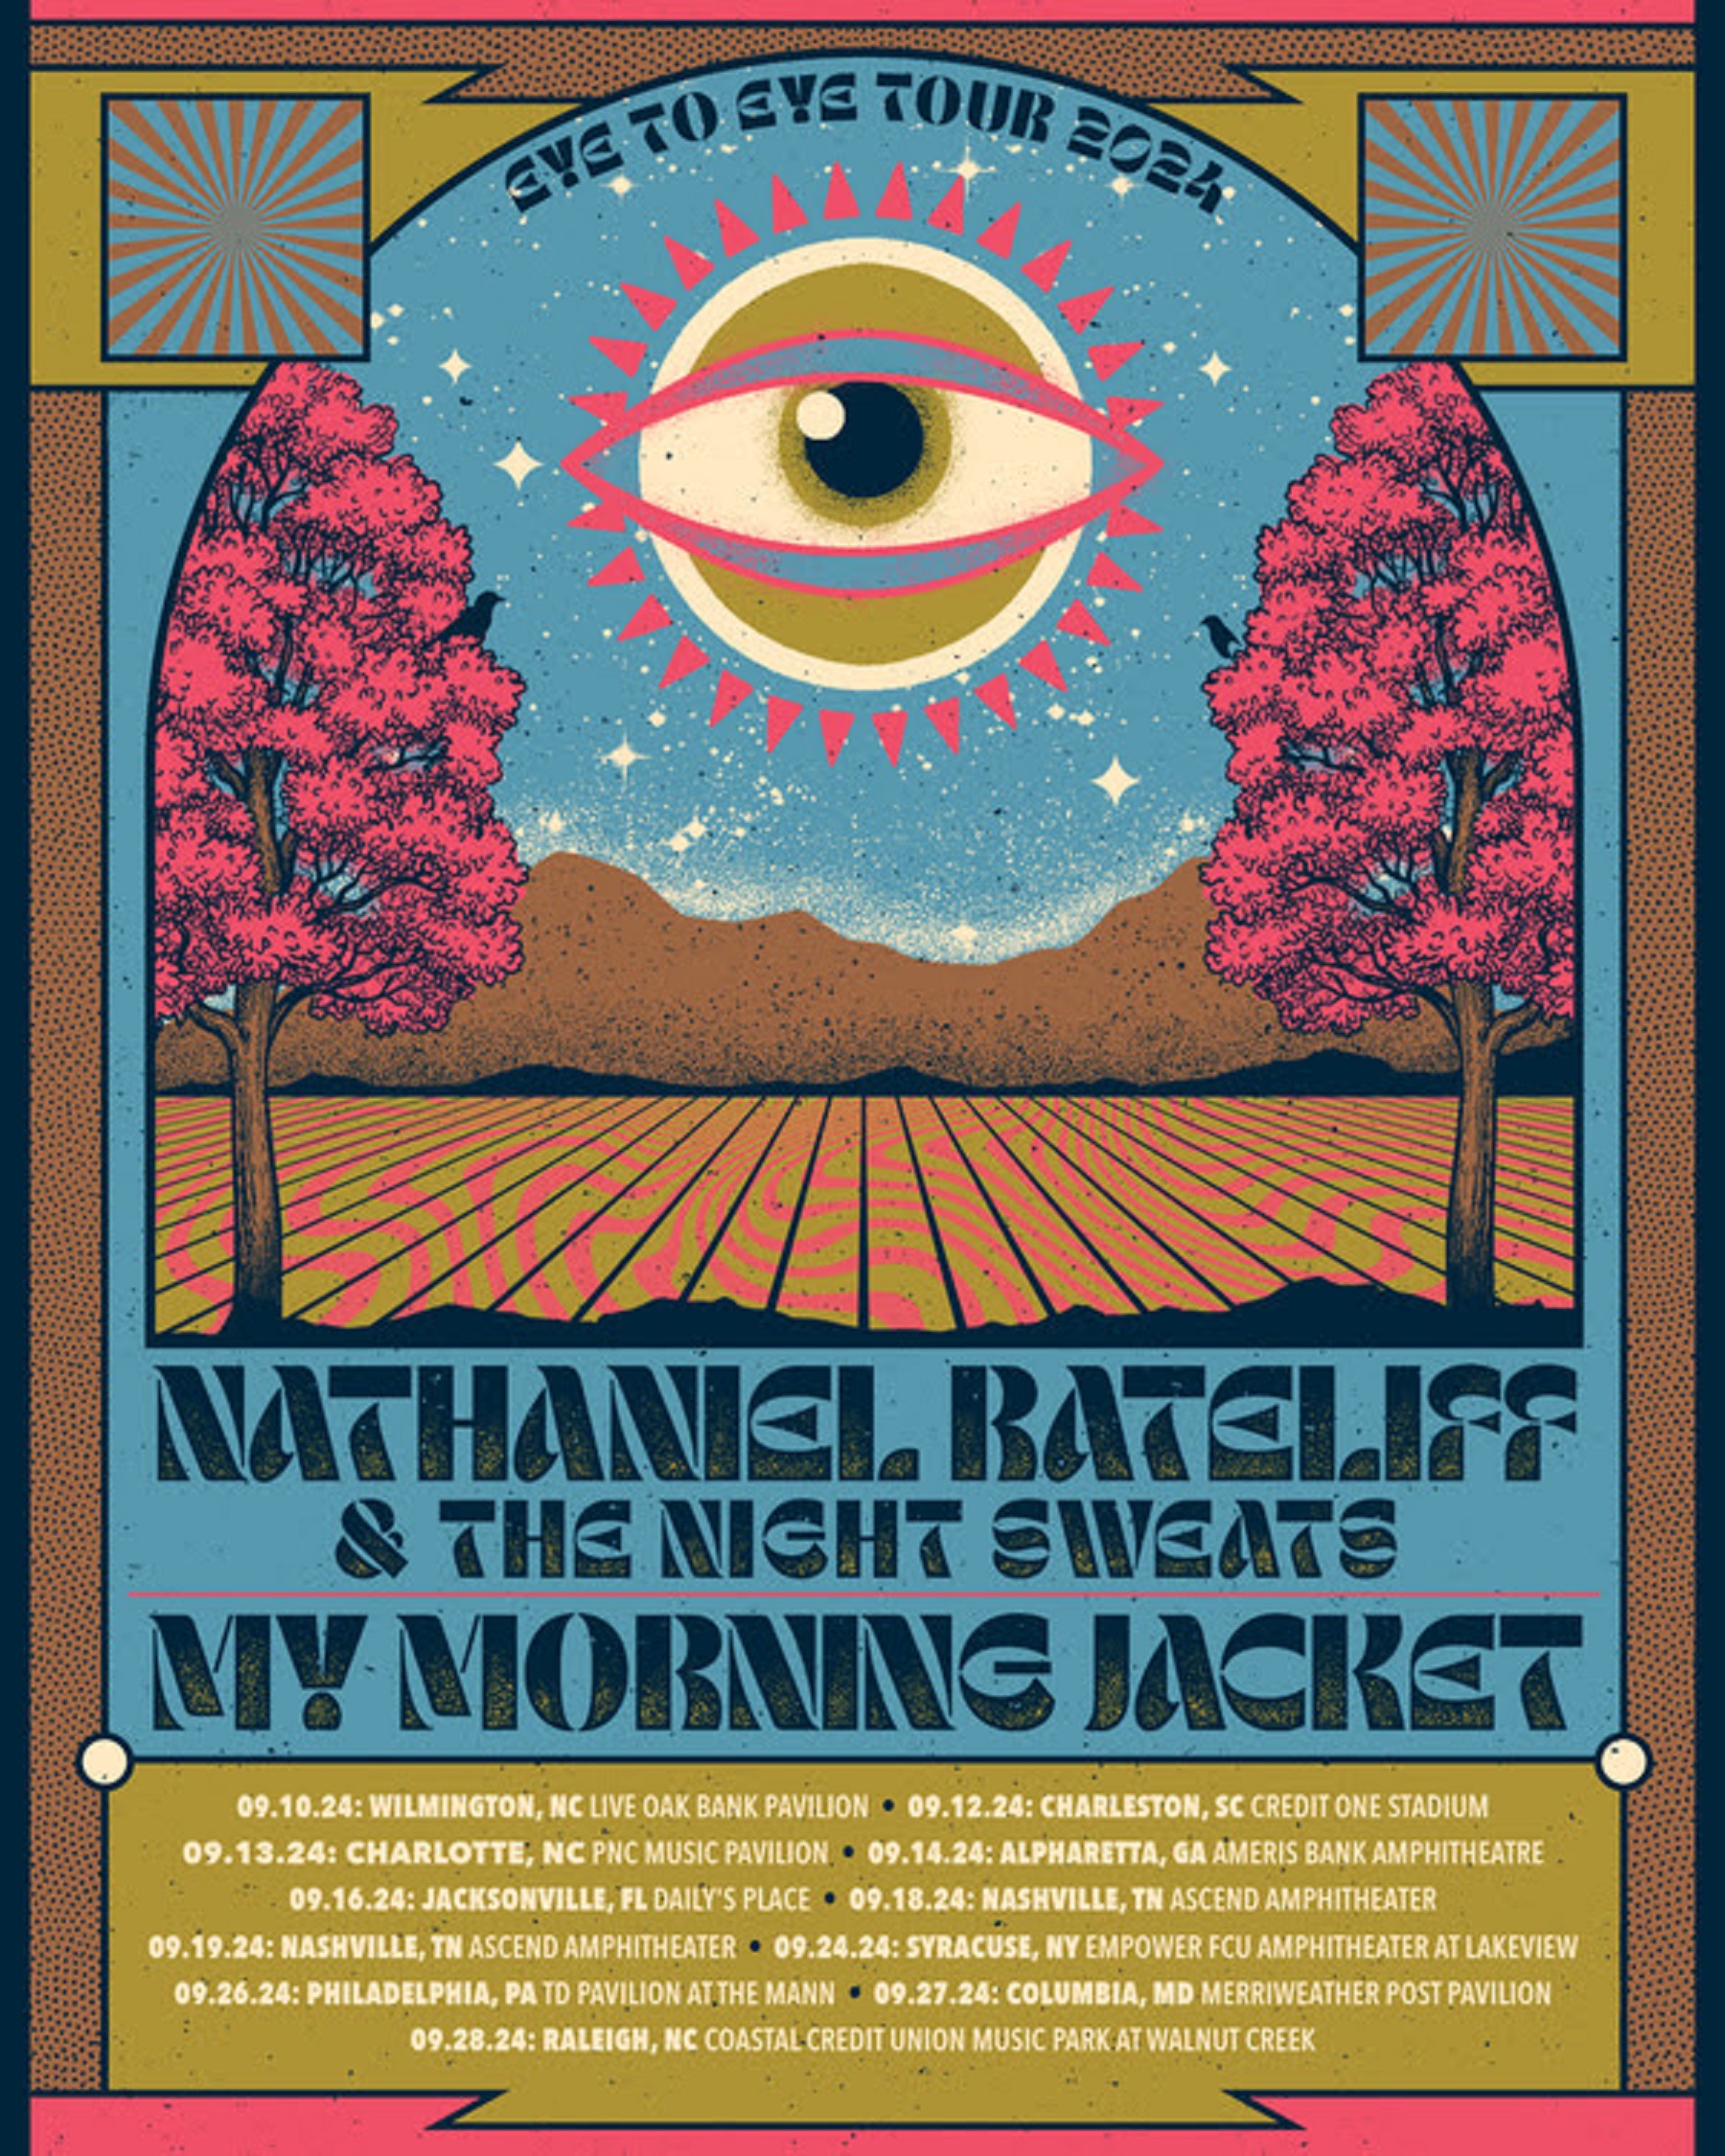 My Morning Jacket and Nathaniel Rateliff & The Night Sweats unite for Eye To Eye Tour